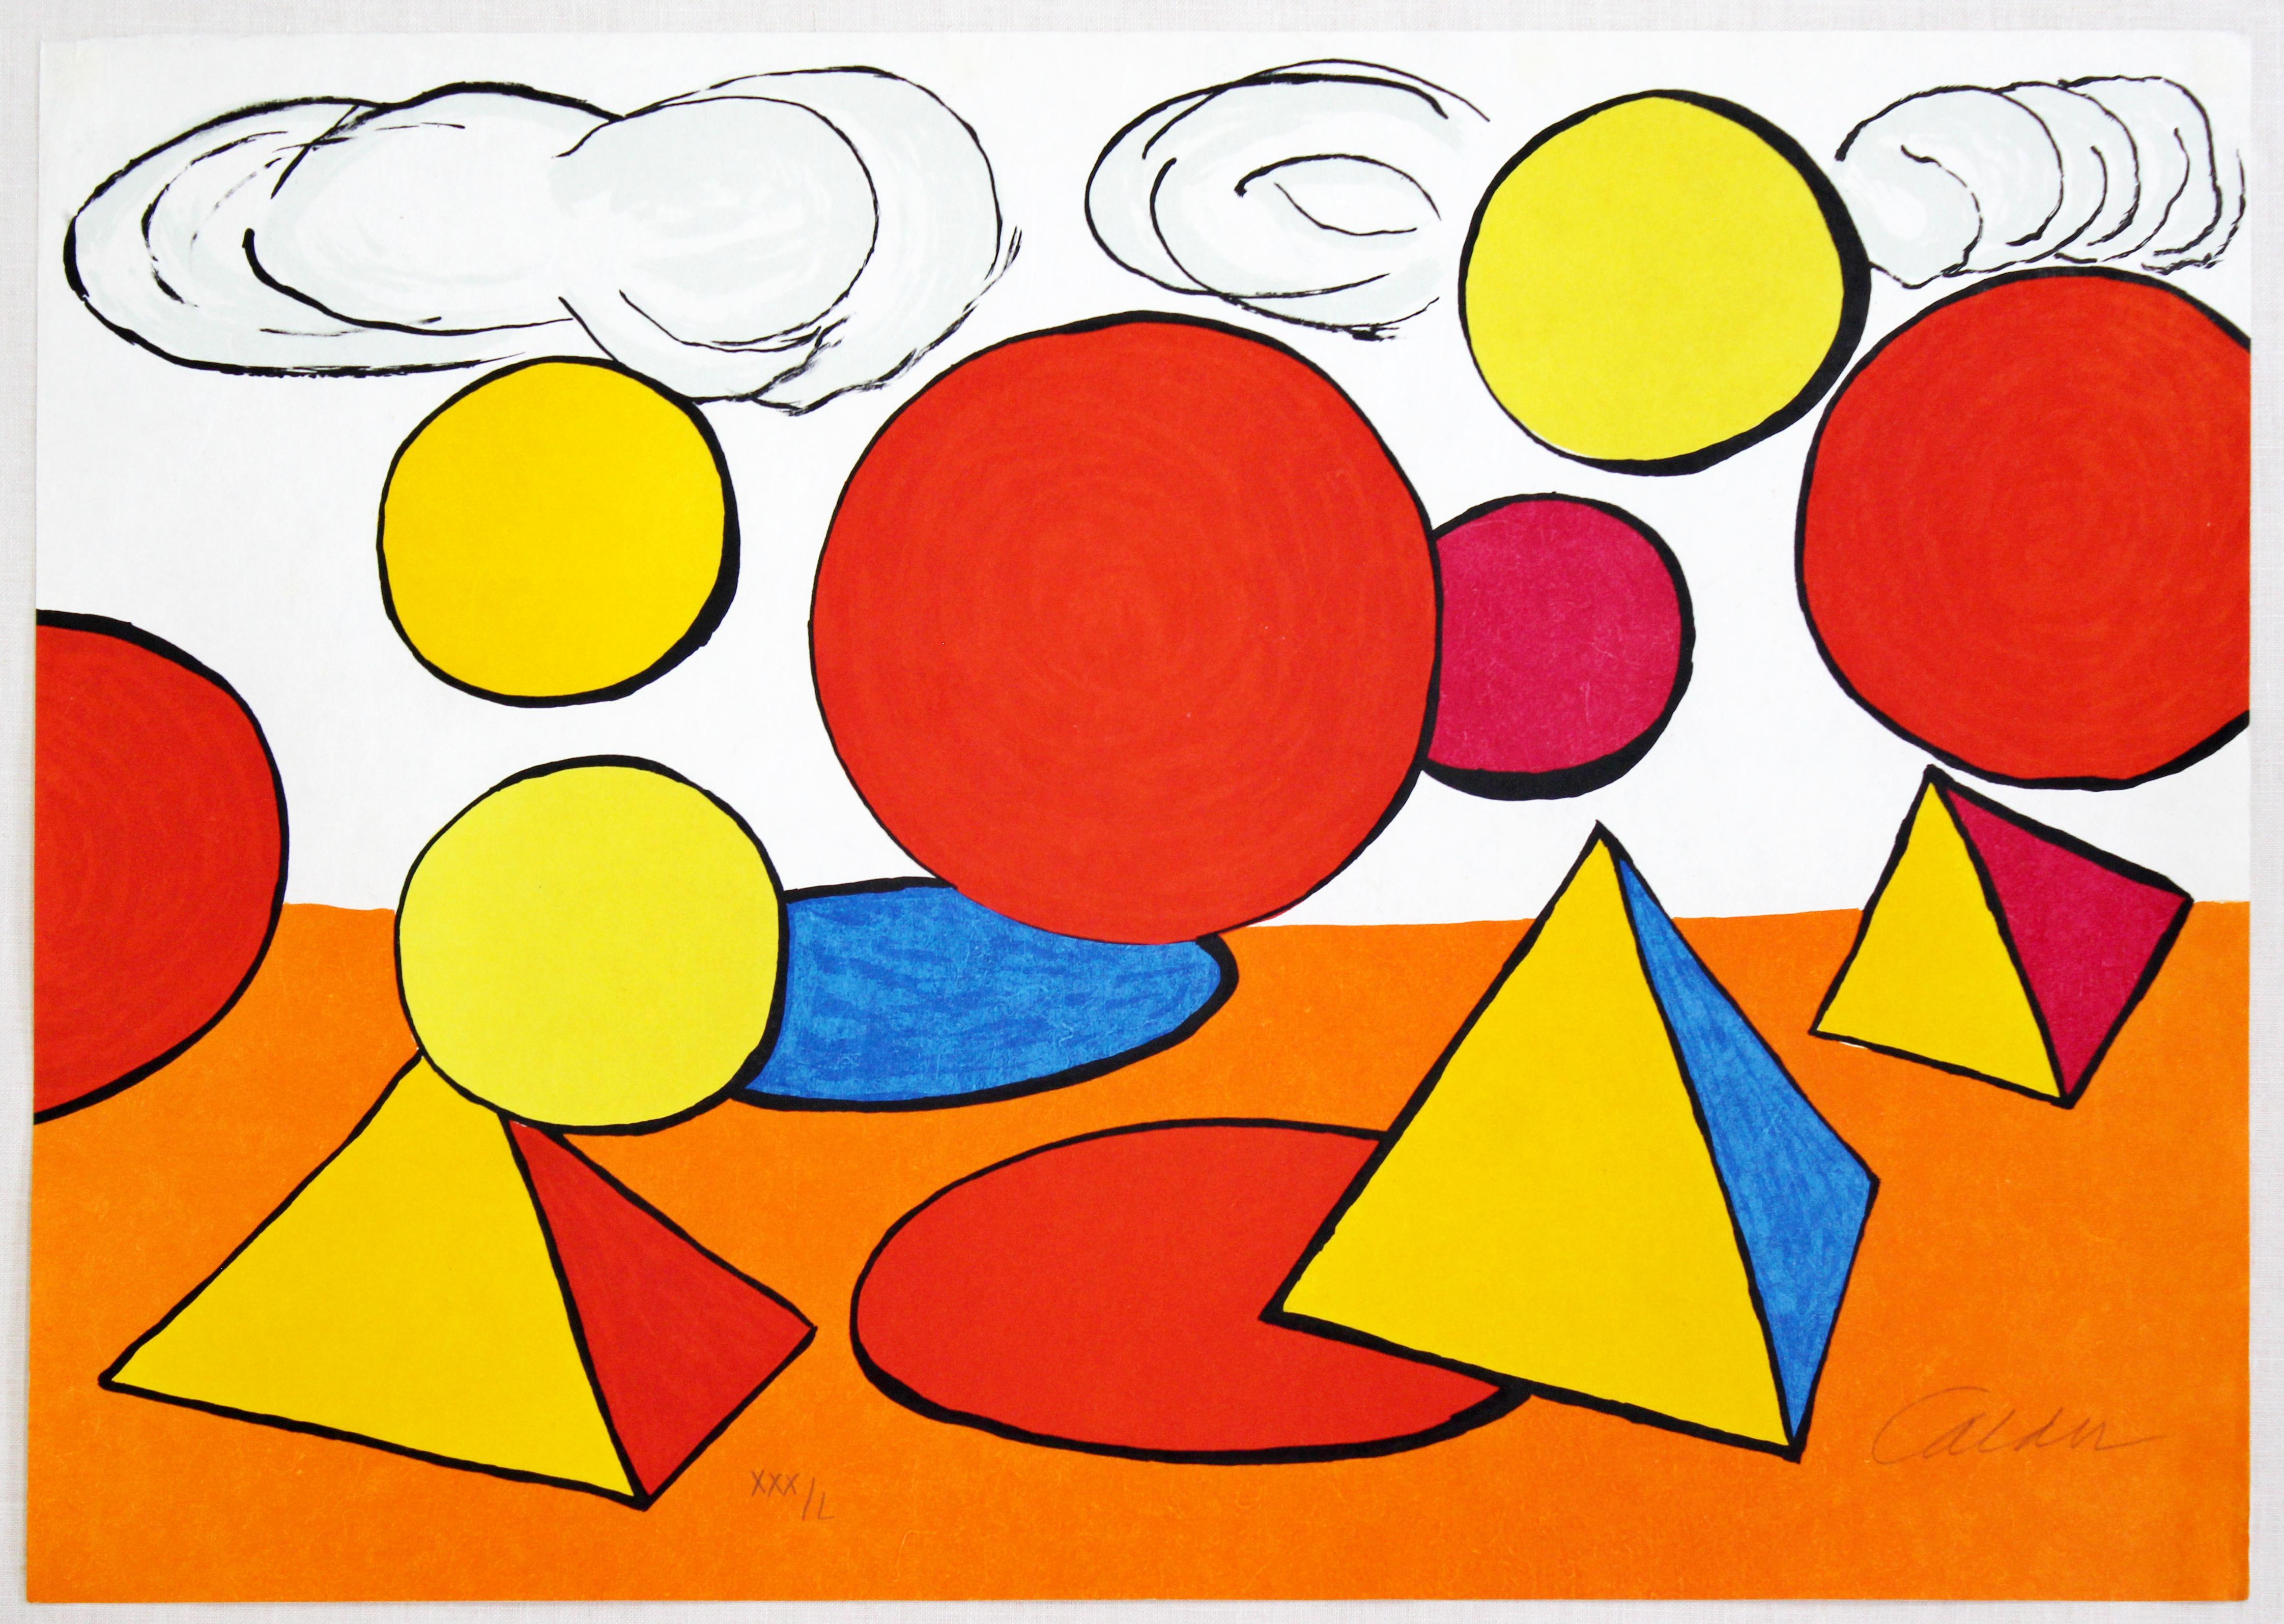 For your consideration is a captivating, framed lithograph Composition V, (from the elementary memory edition) pencil signed by Alexander Calder and numbered 30/50. In excellent condition. The dimensions are 34